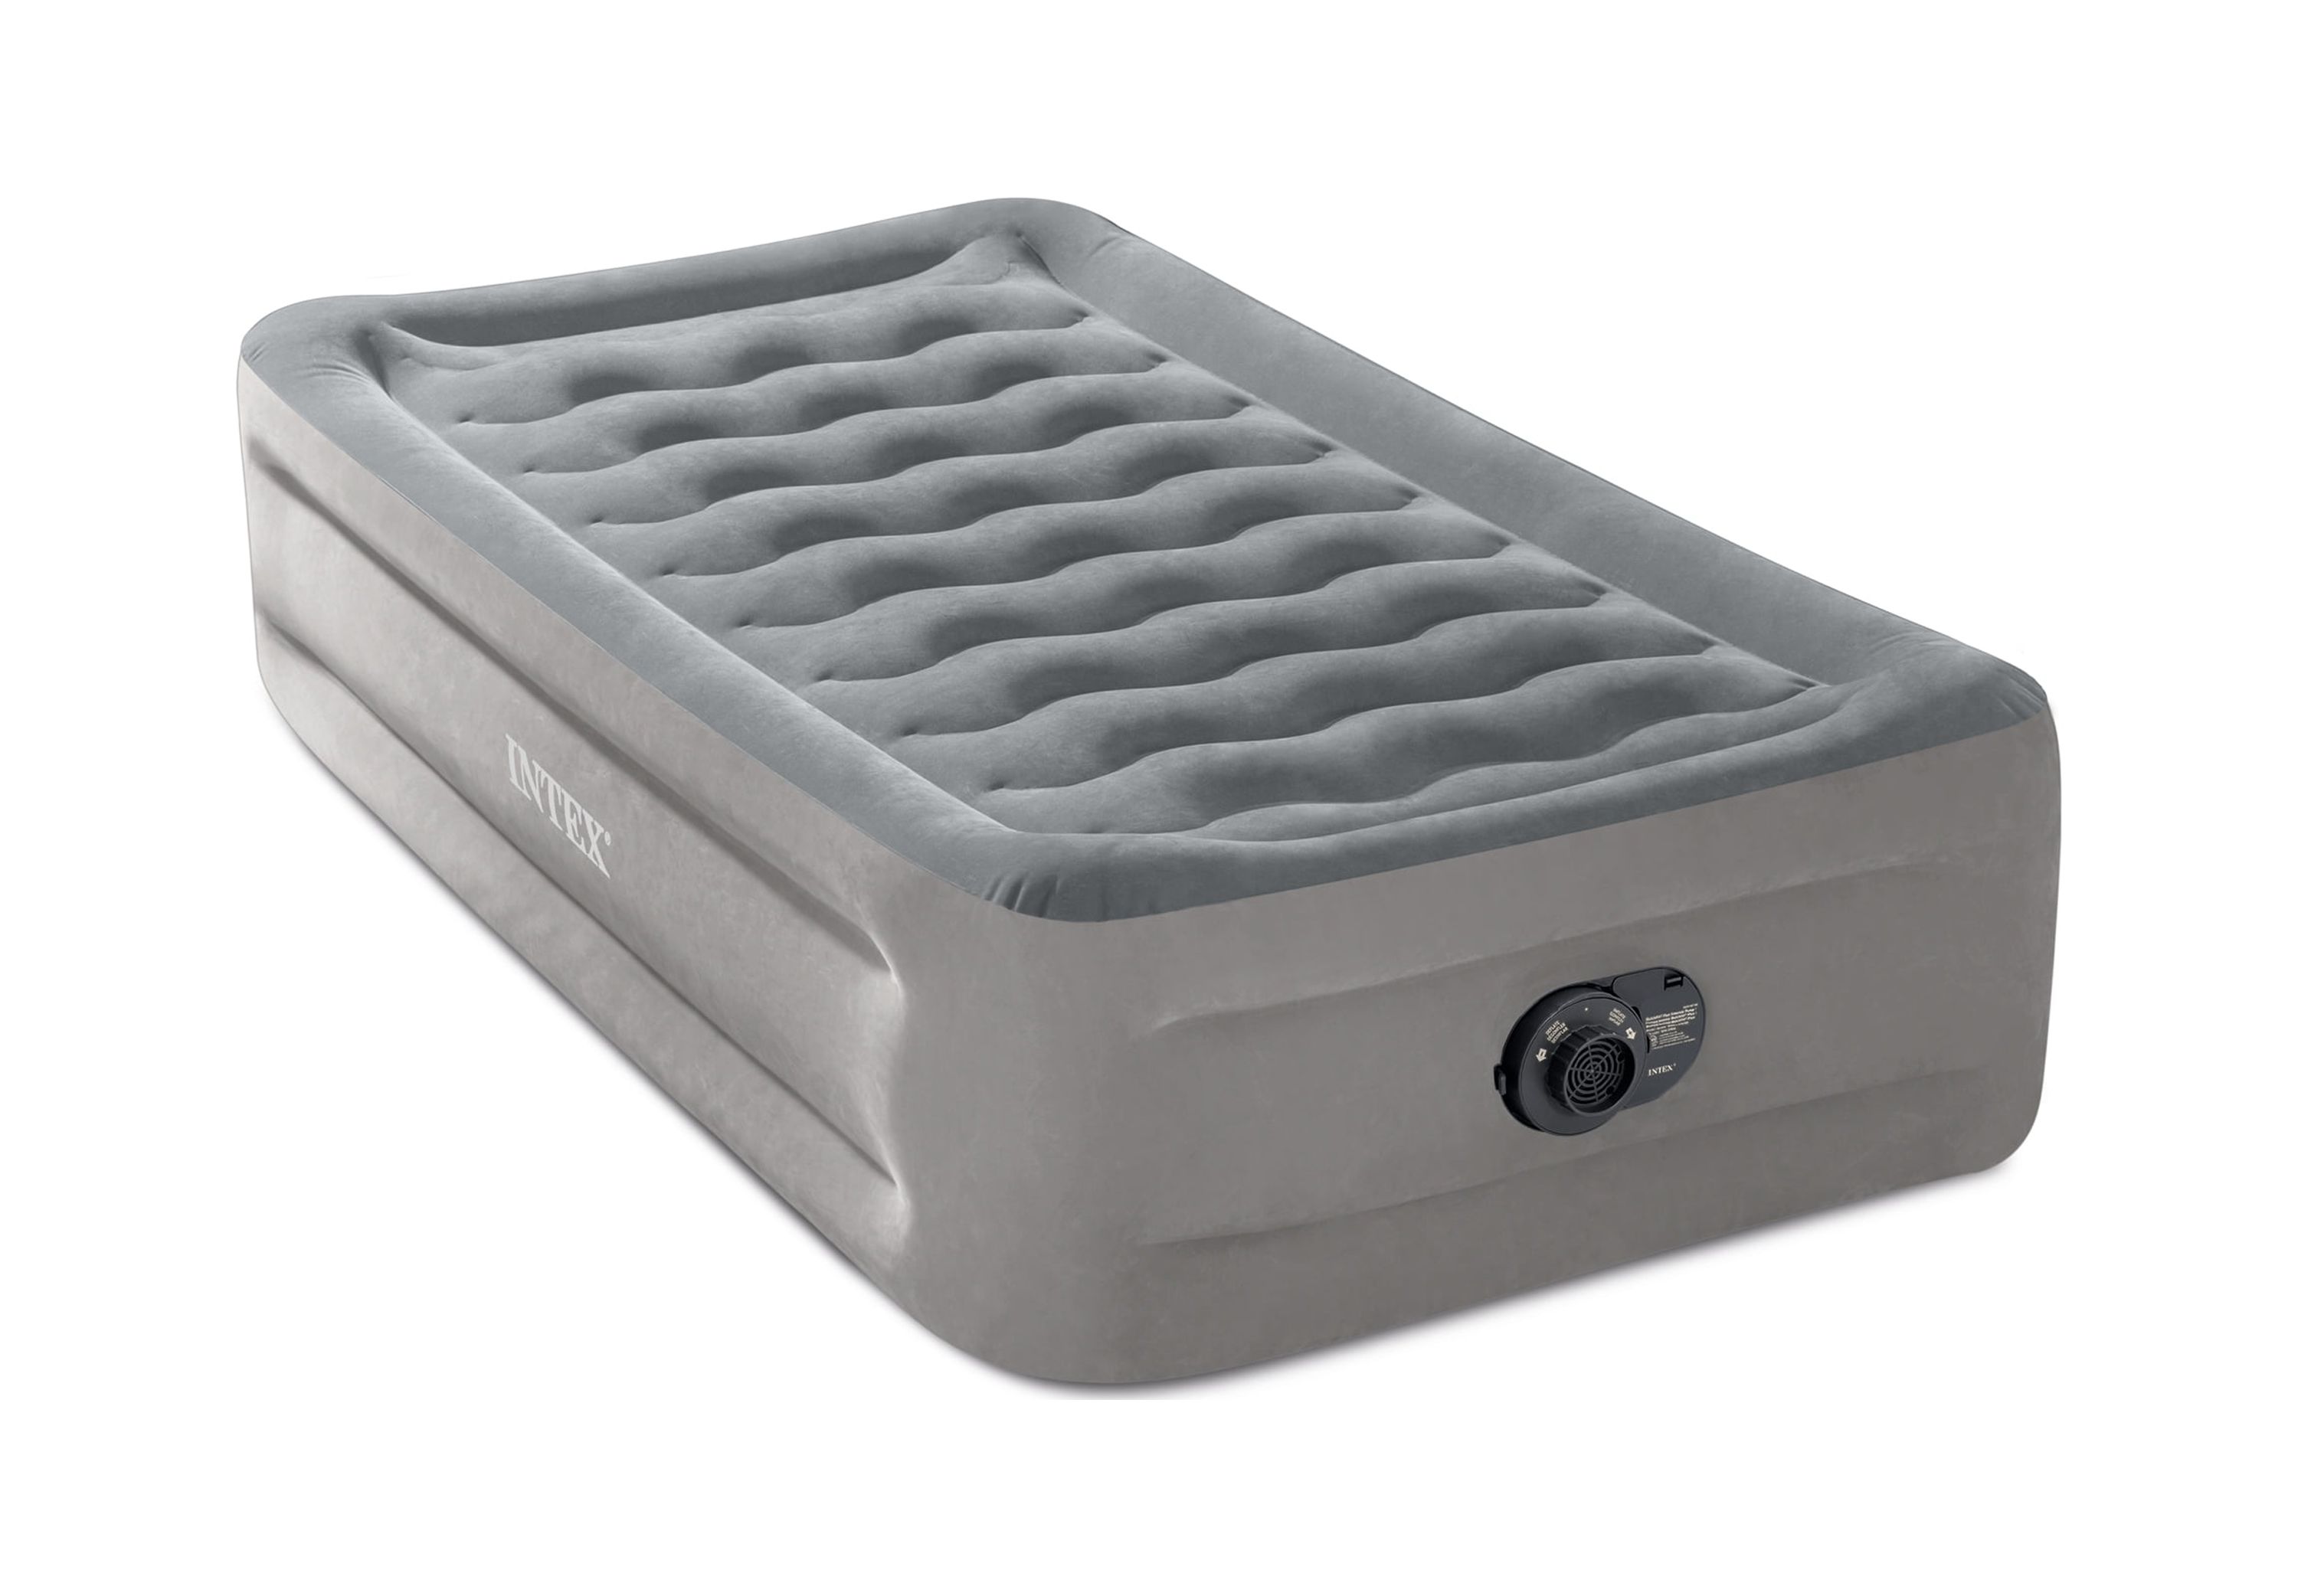 Intex 18" High Comfort Plush Raised Air Mattress Bed with Built-in Pump - Twin - image 1 of 16